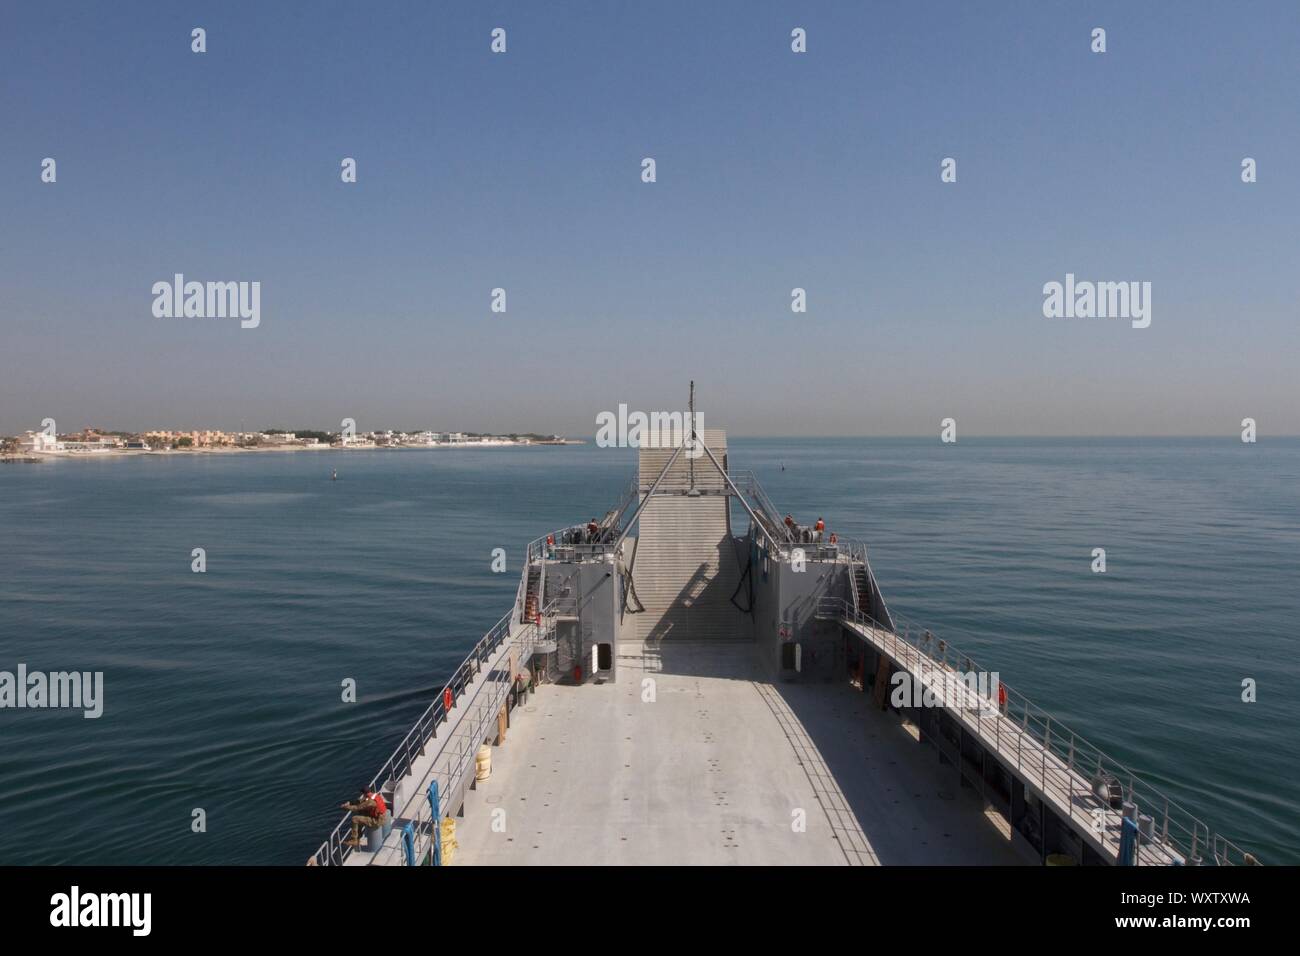 U.S. Army Logistics Support Vessel MG Charles P. Gross (LSV 5) goes out to sea in the Persian Gulf on Sept. 13, 2019 to perform basic drills. (U.S. Army photo by Staff Sgt. Godot G. Galgano) Stock Photo